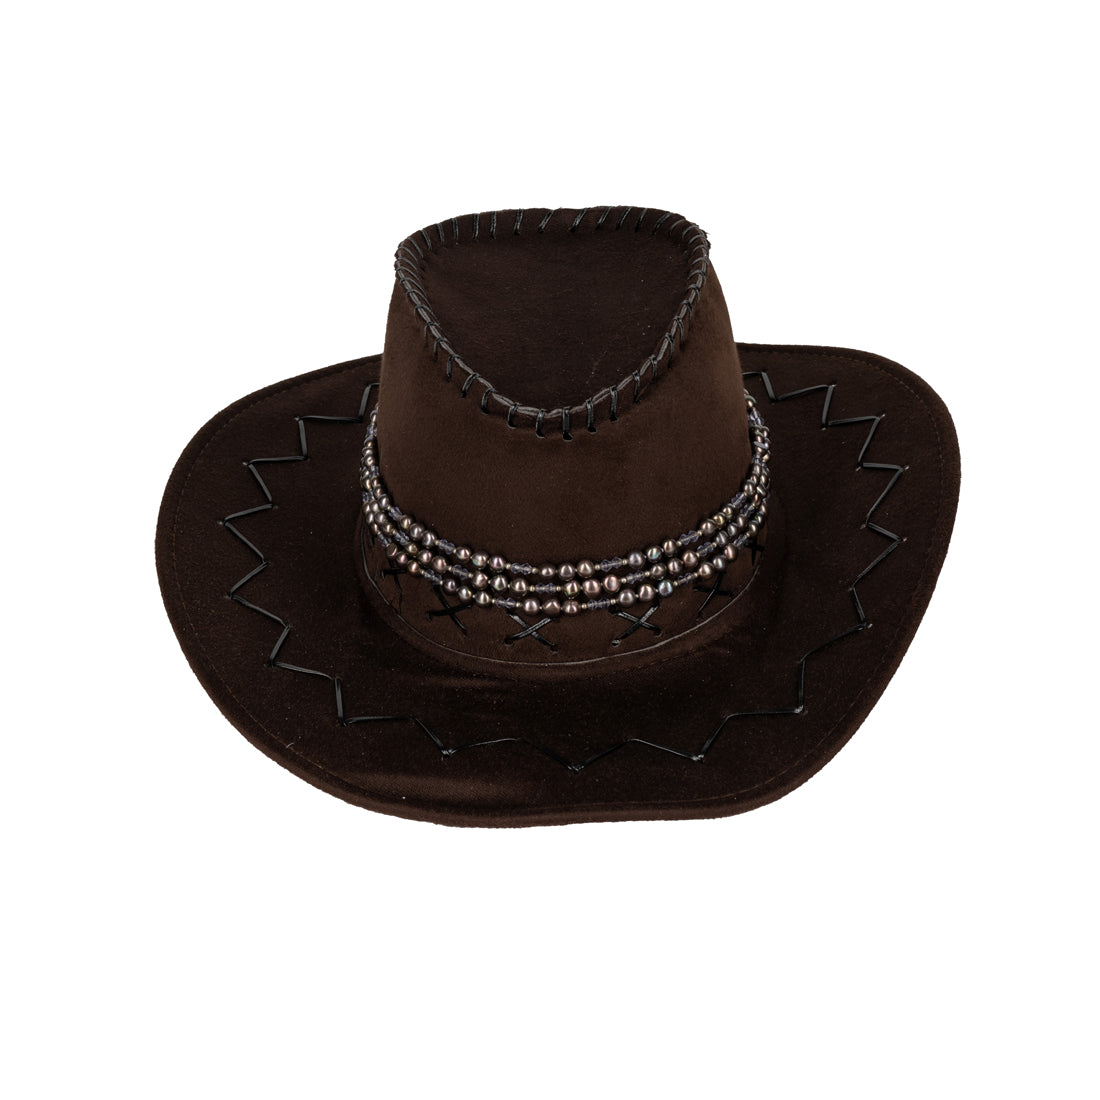 Brown Cowboy Brand New Hat with Accessories